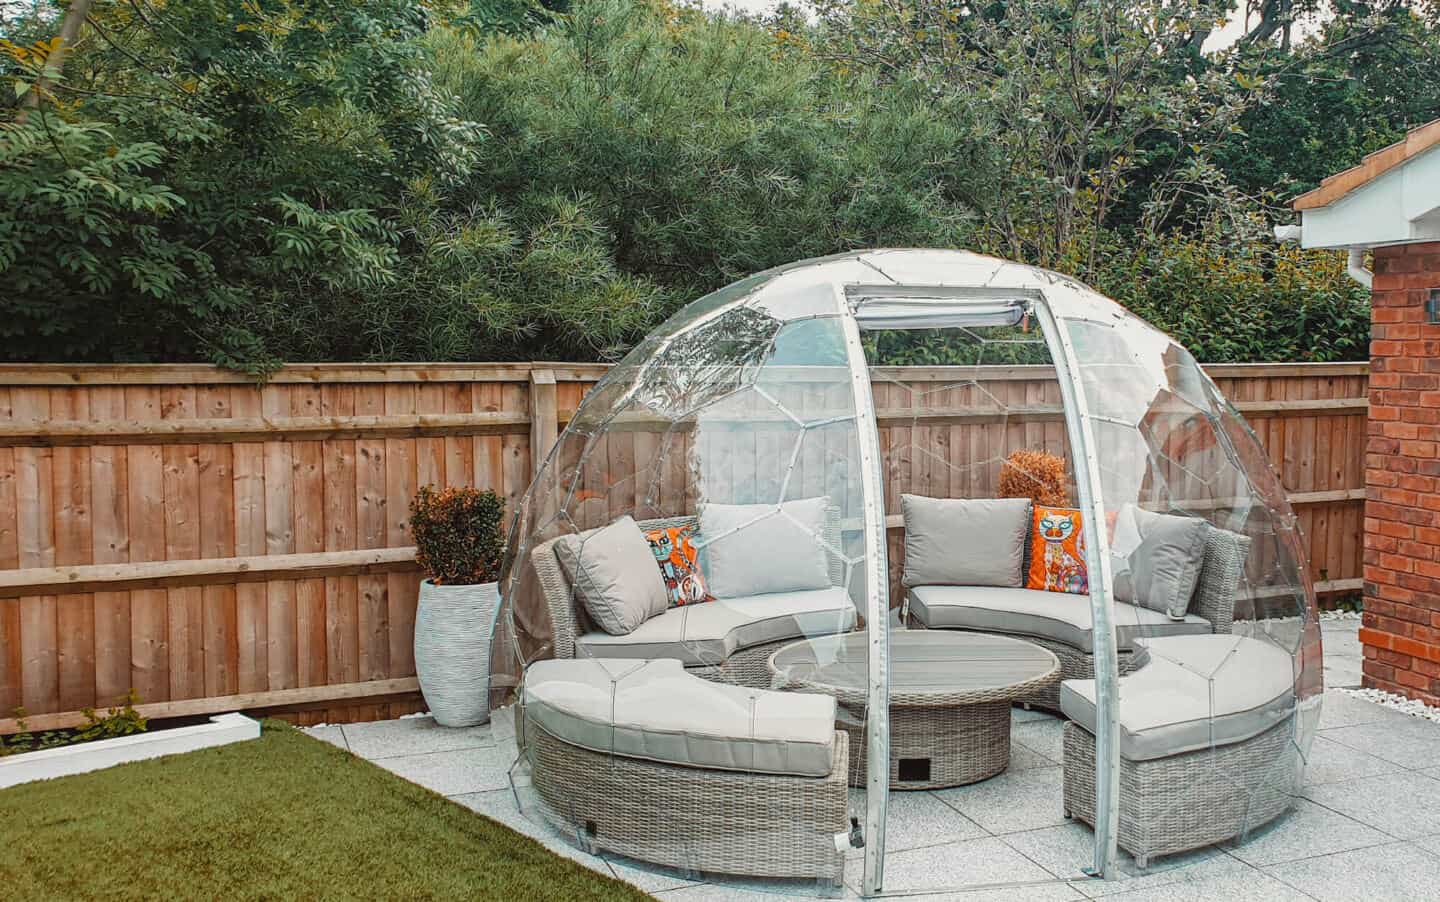 Curved garden lounge set inside a garden dome on a patio